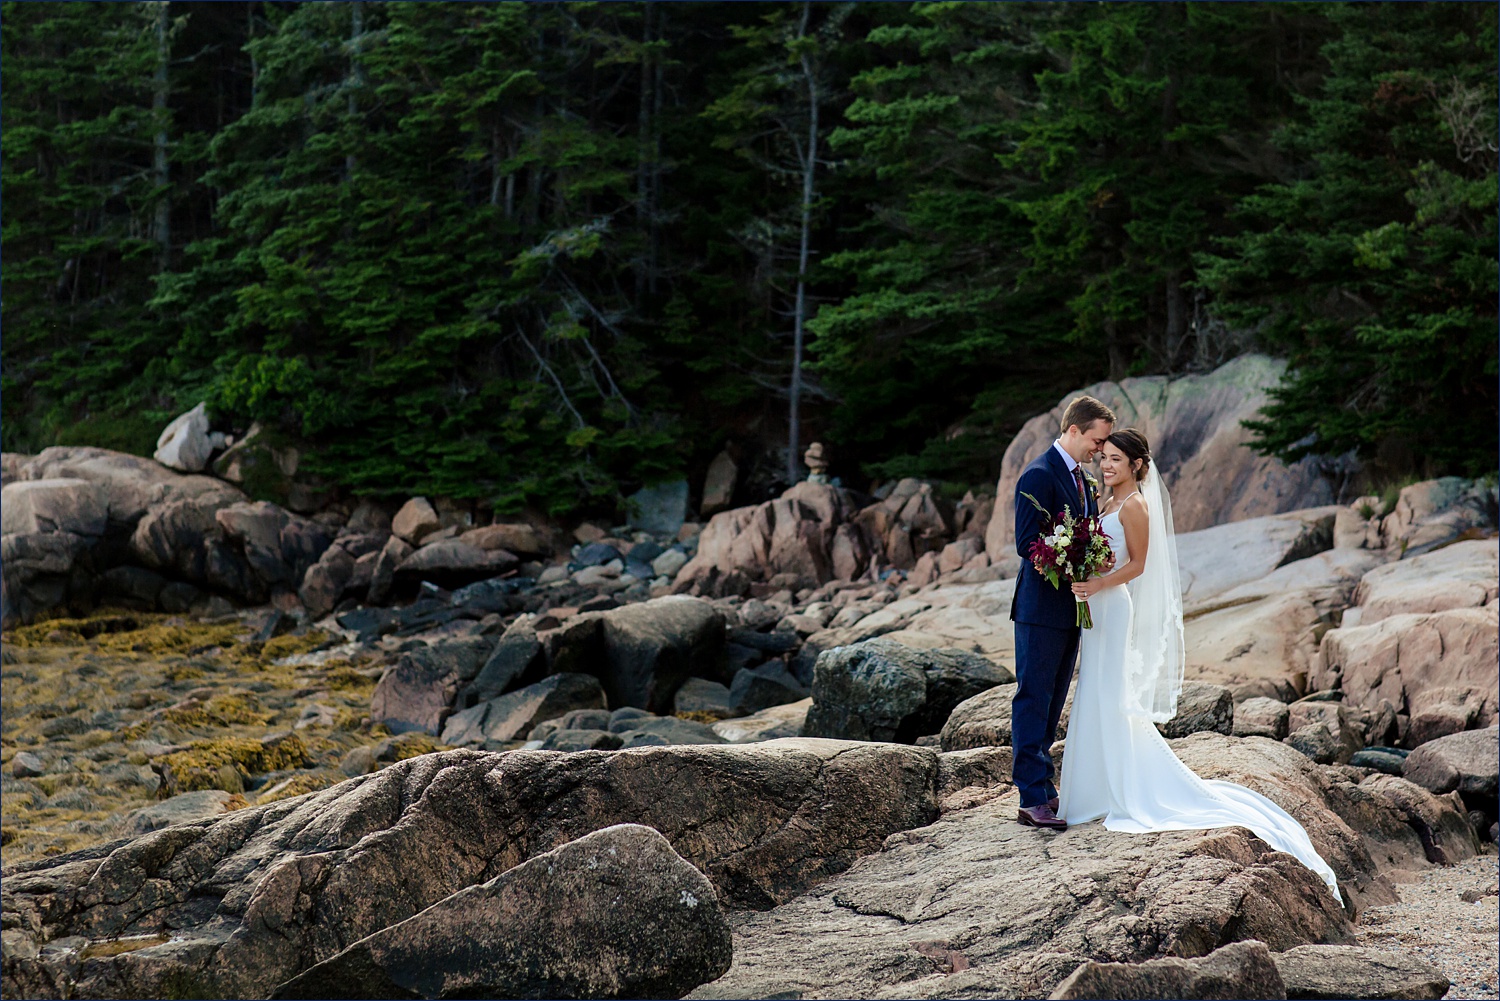 The newlyweds laugh together in front of the majestic coastal Maine woods